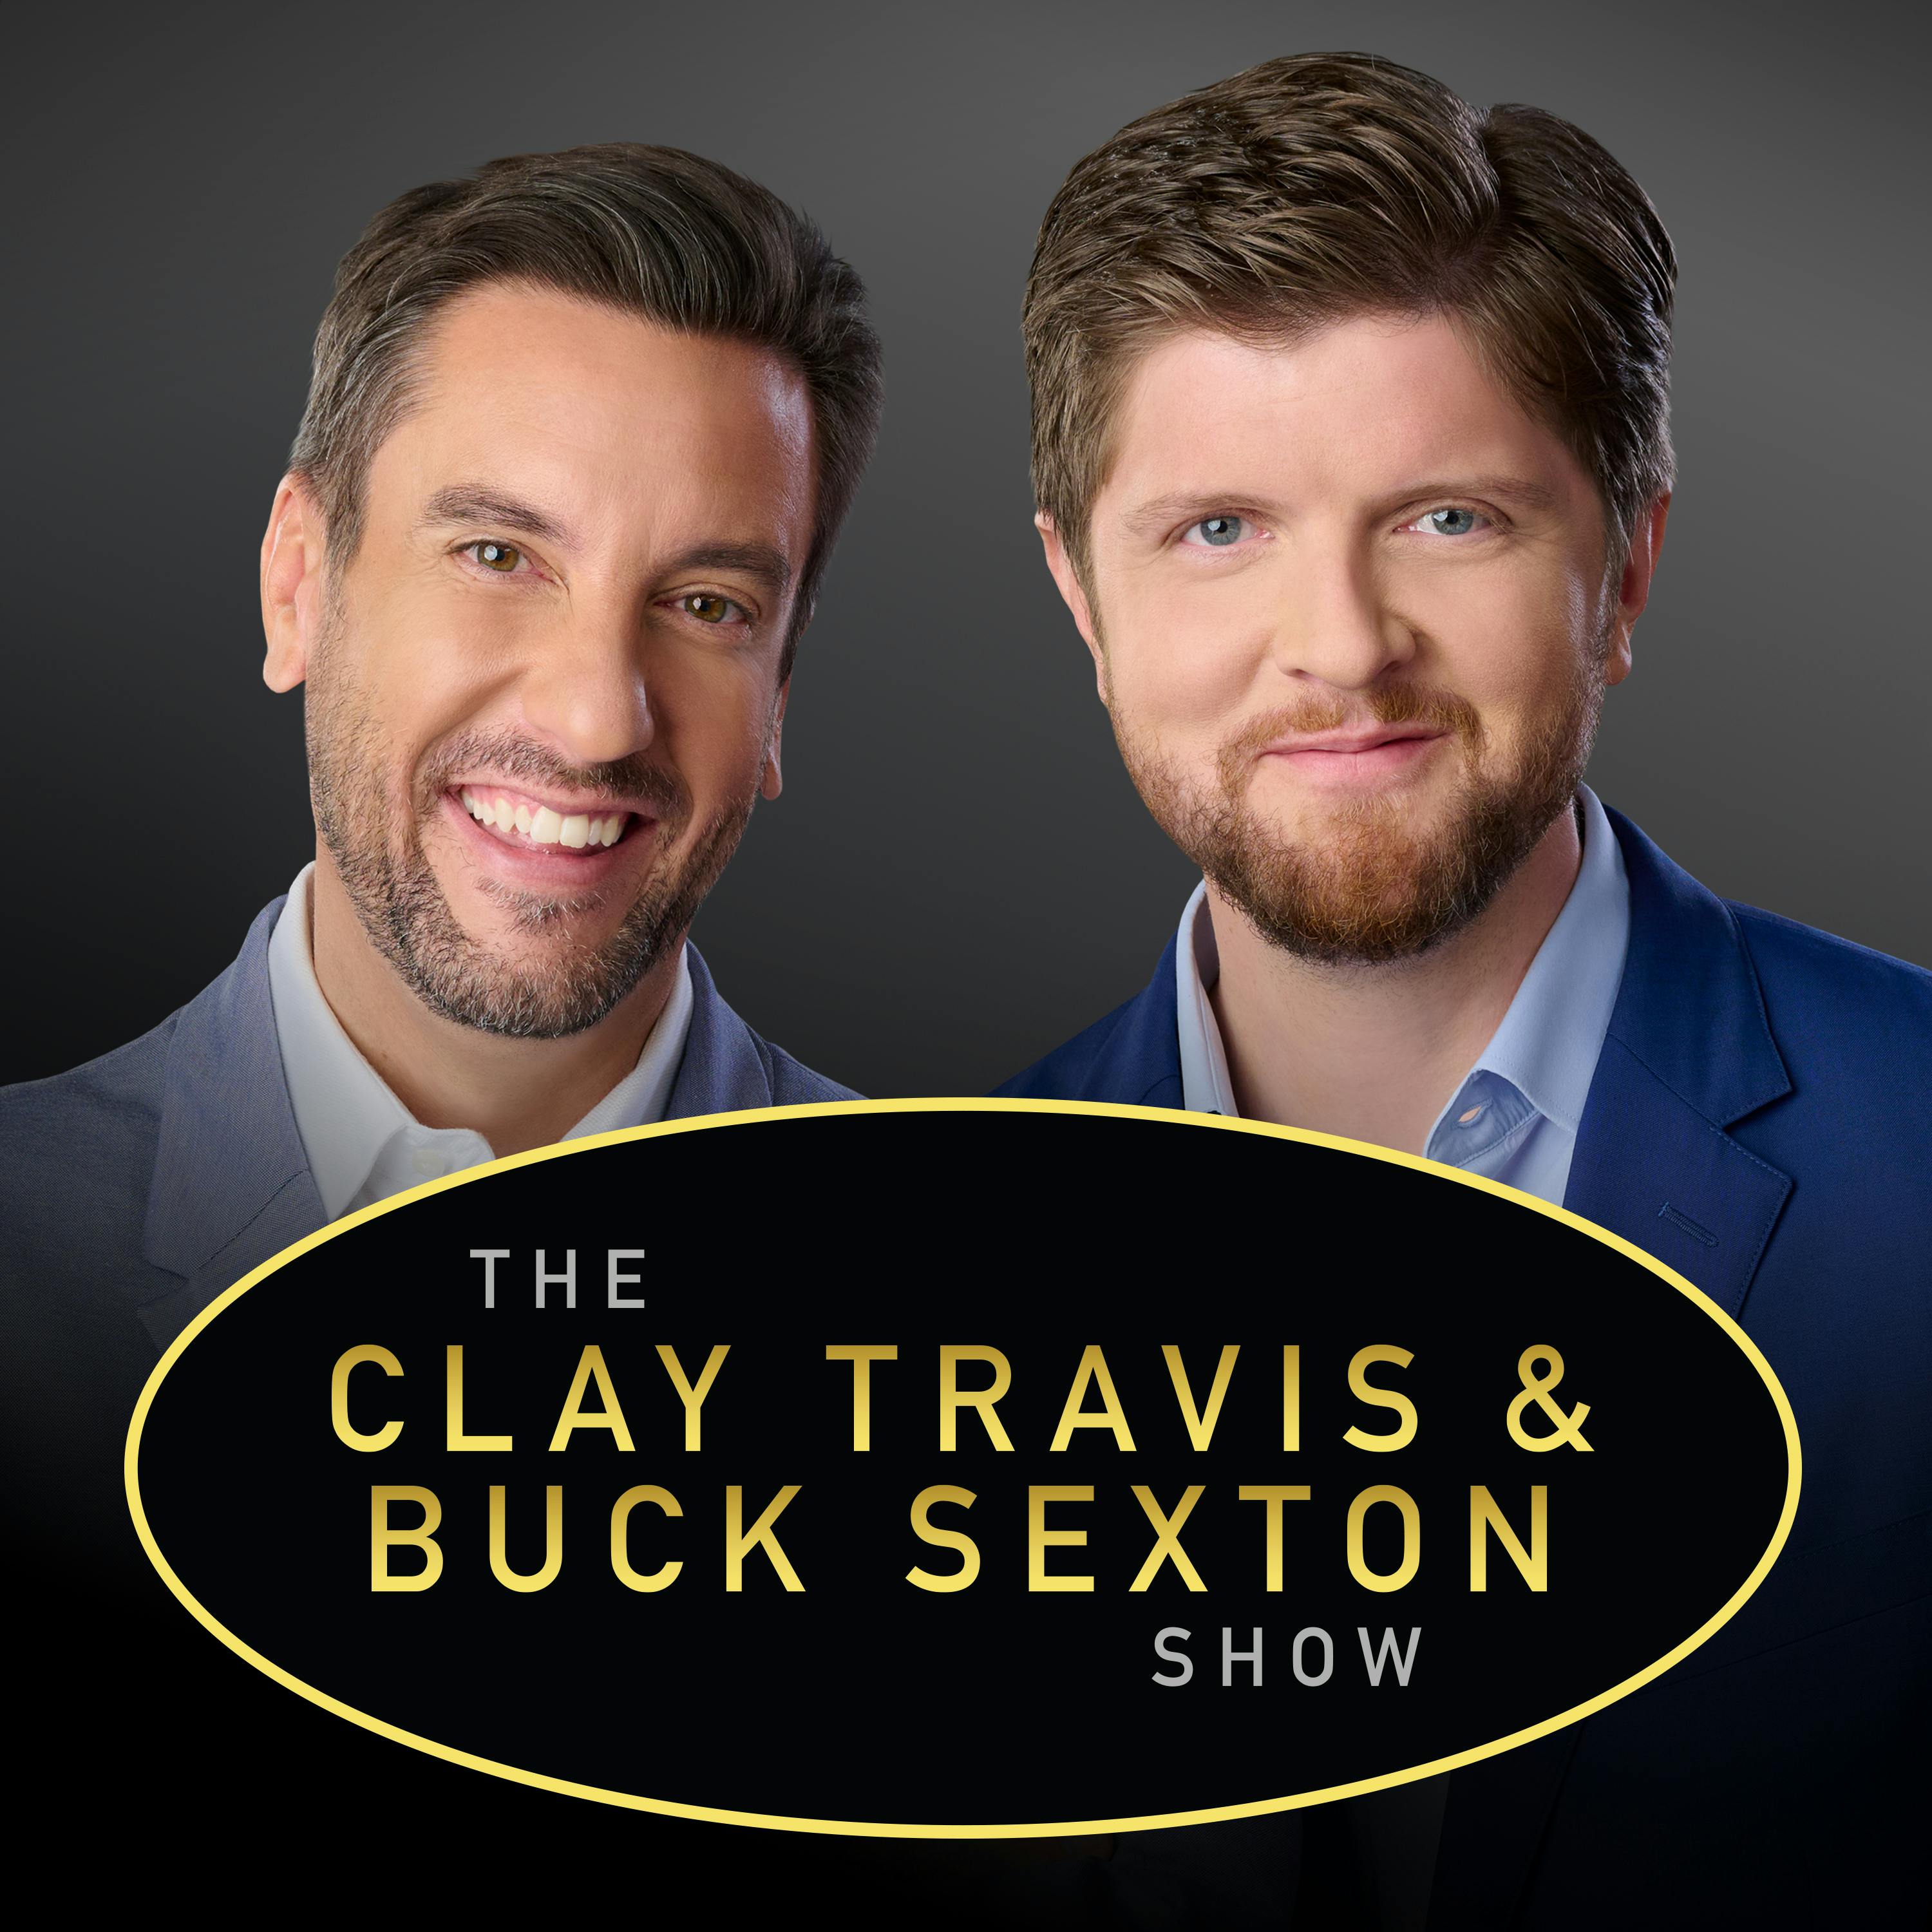 Clay Travis and Buck Sexton Show H1 – Jan 17 2022